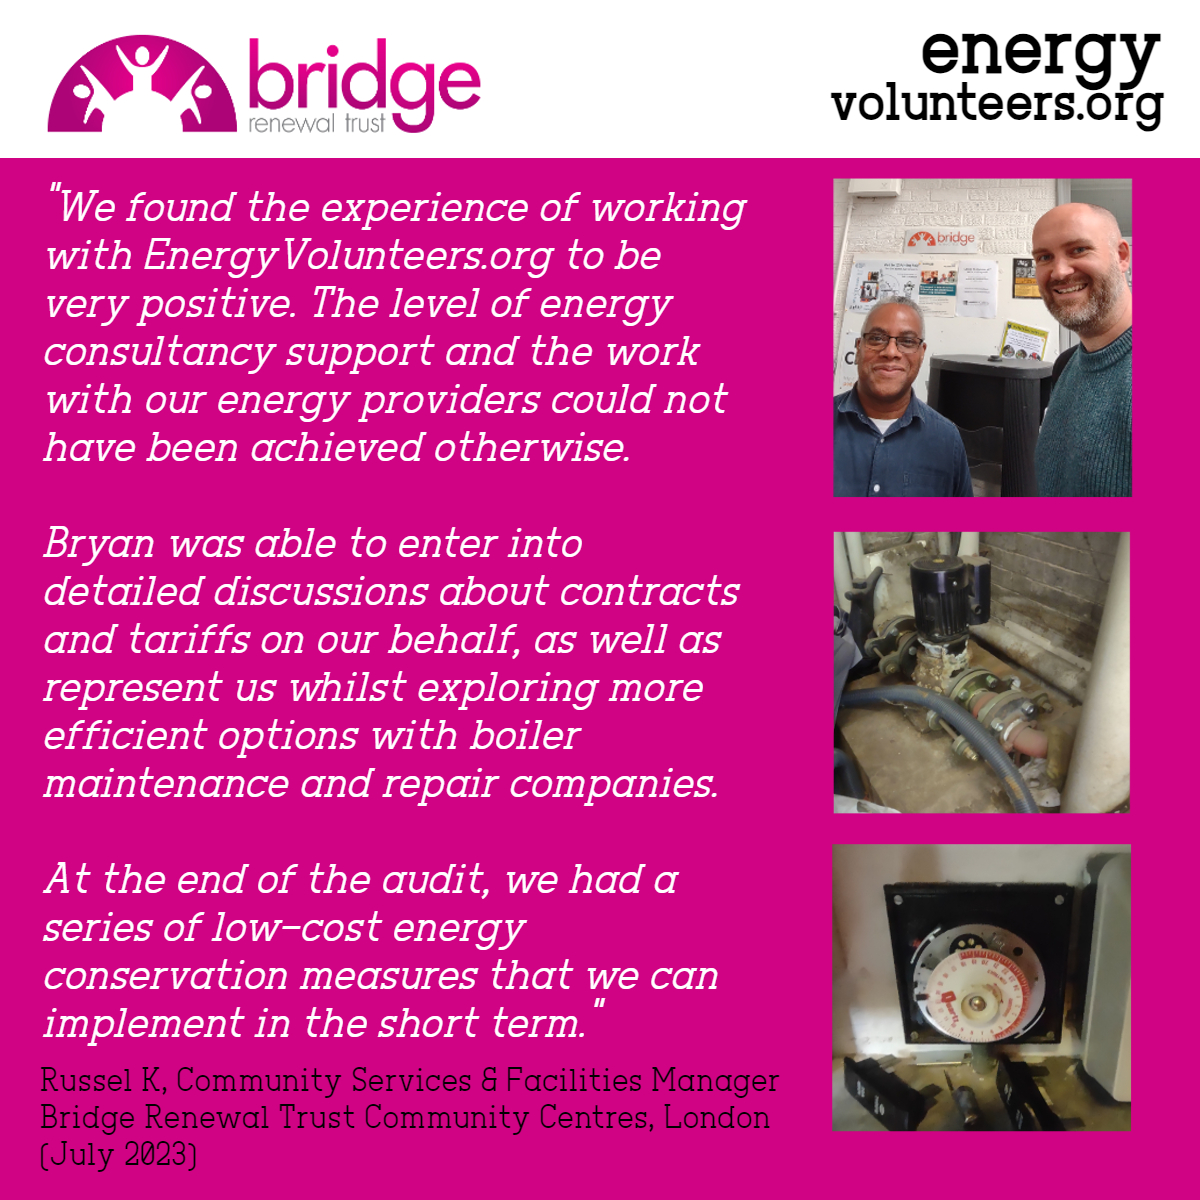 @ReachVolunteer Great initiative @ReachVolunteer and something we are trying to help with; linking small and medium sized charities with energy specialist volunteers to help them reduce their energy consumption and utility costs like the @BridgeRenewal Trust below😃 #energyvolunteers